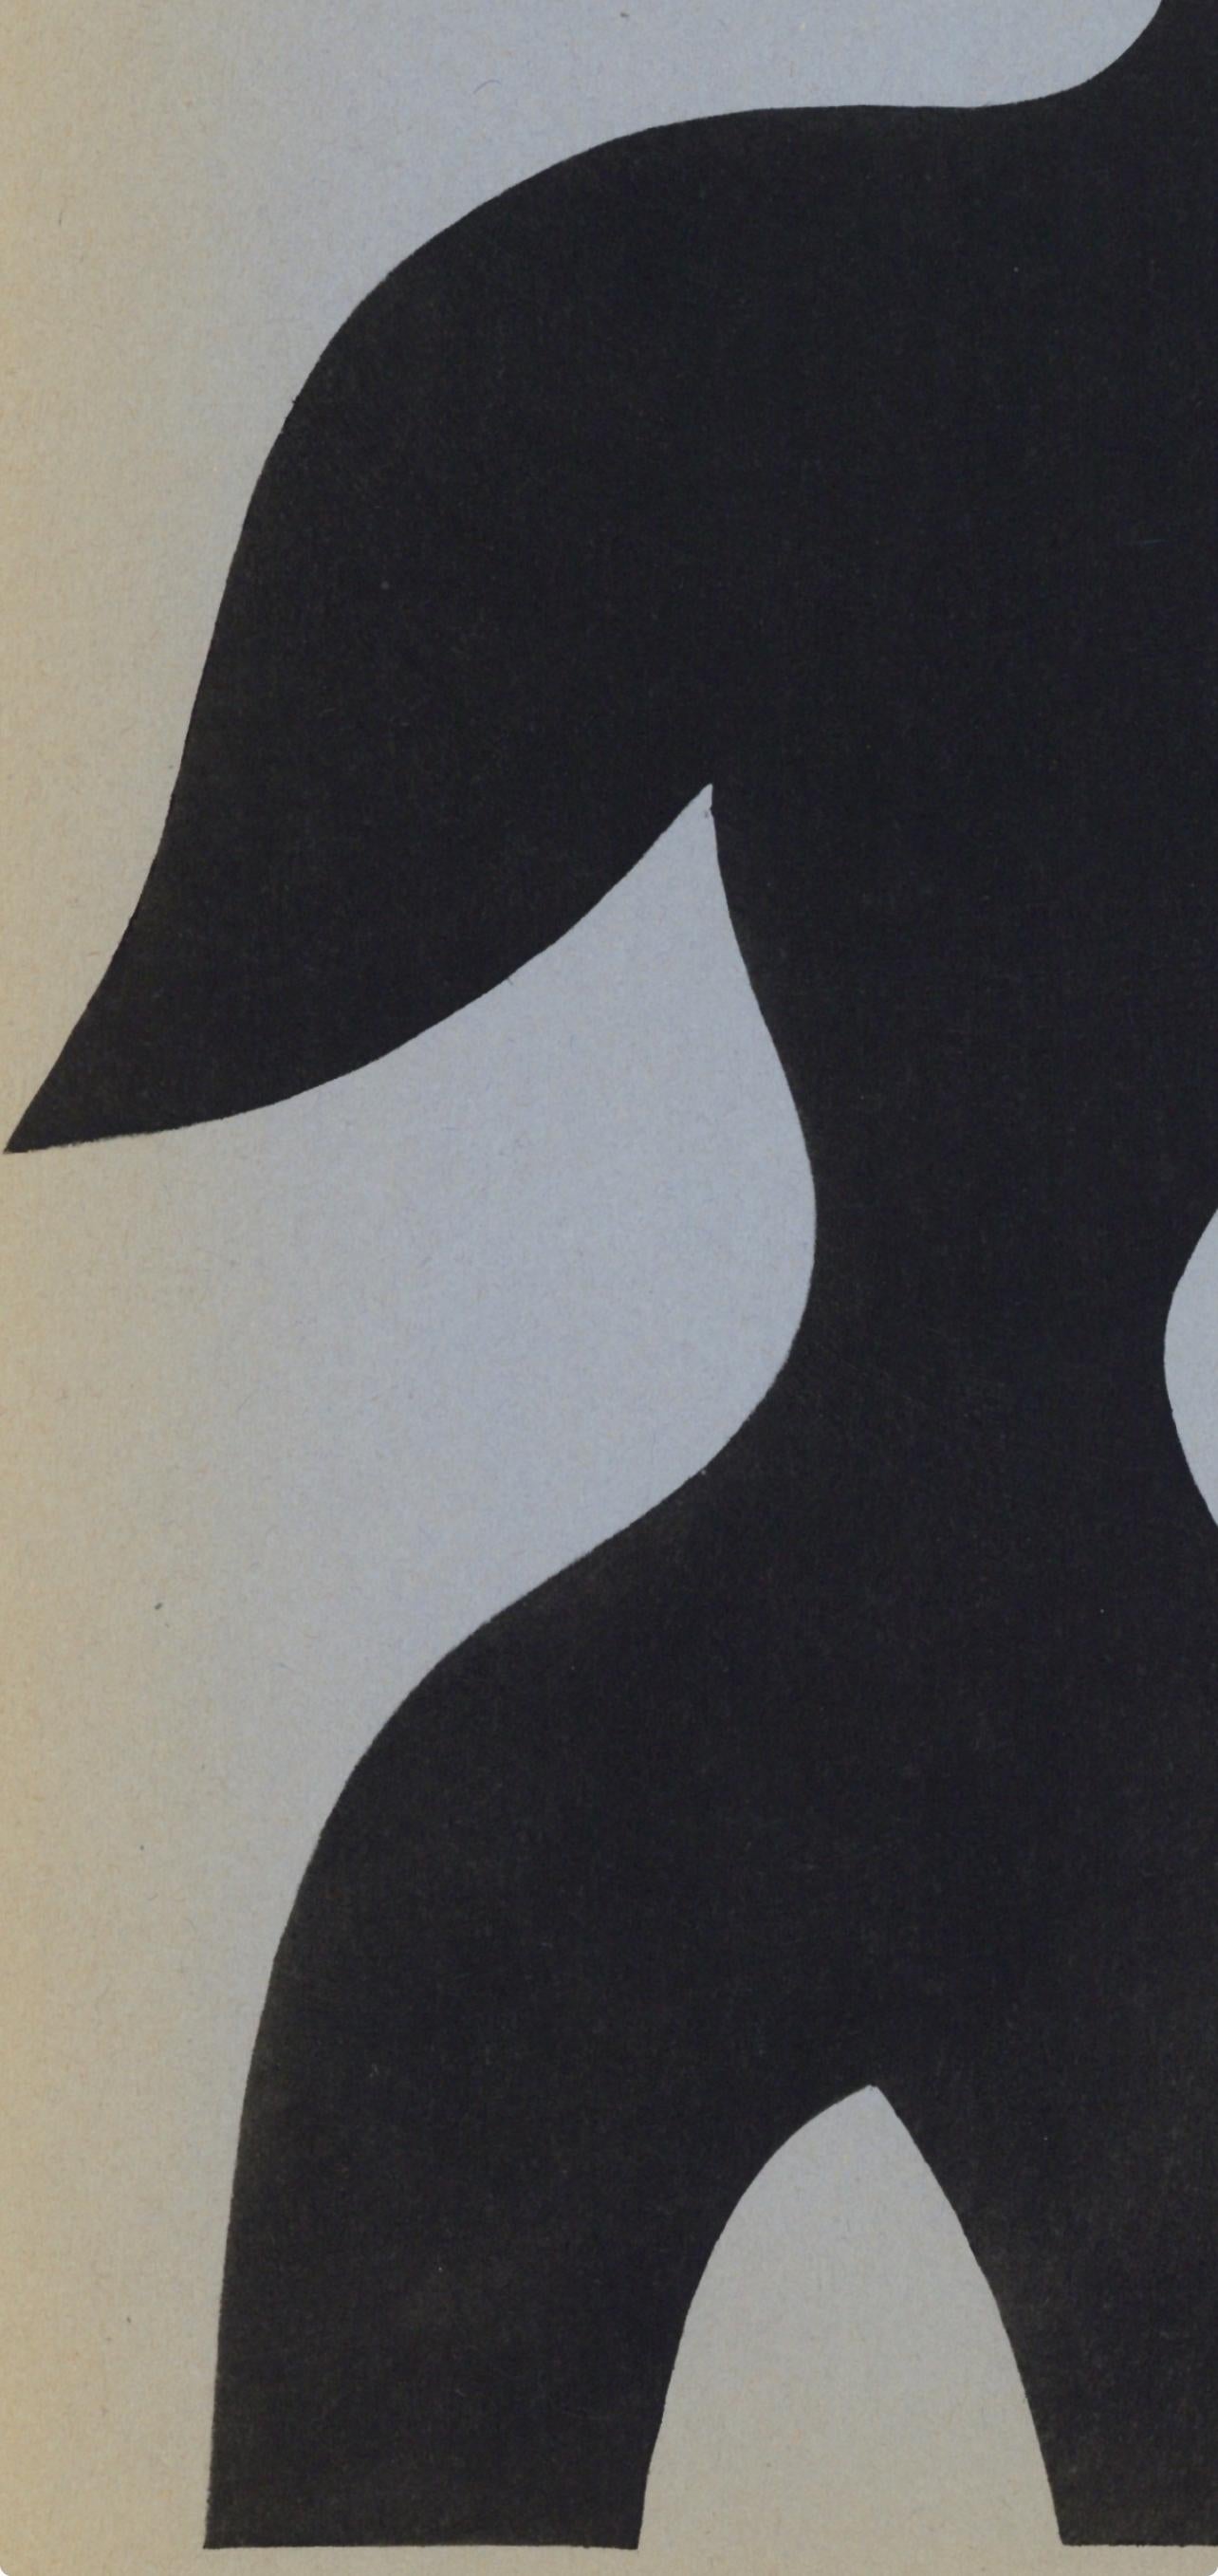 Lithograph on wove paper. Unsigned and unnumbered, as issued. Good Condition; never framed or matted. Notes: From the volume, XXe Siècle, n°8, 1957. Published by Editions XXe Siècle, Paris; Printed by Mourlot, Paris, 1957.

JEAN ARP (1886-1966),